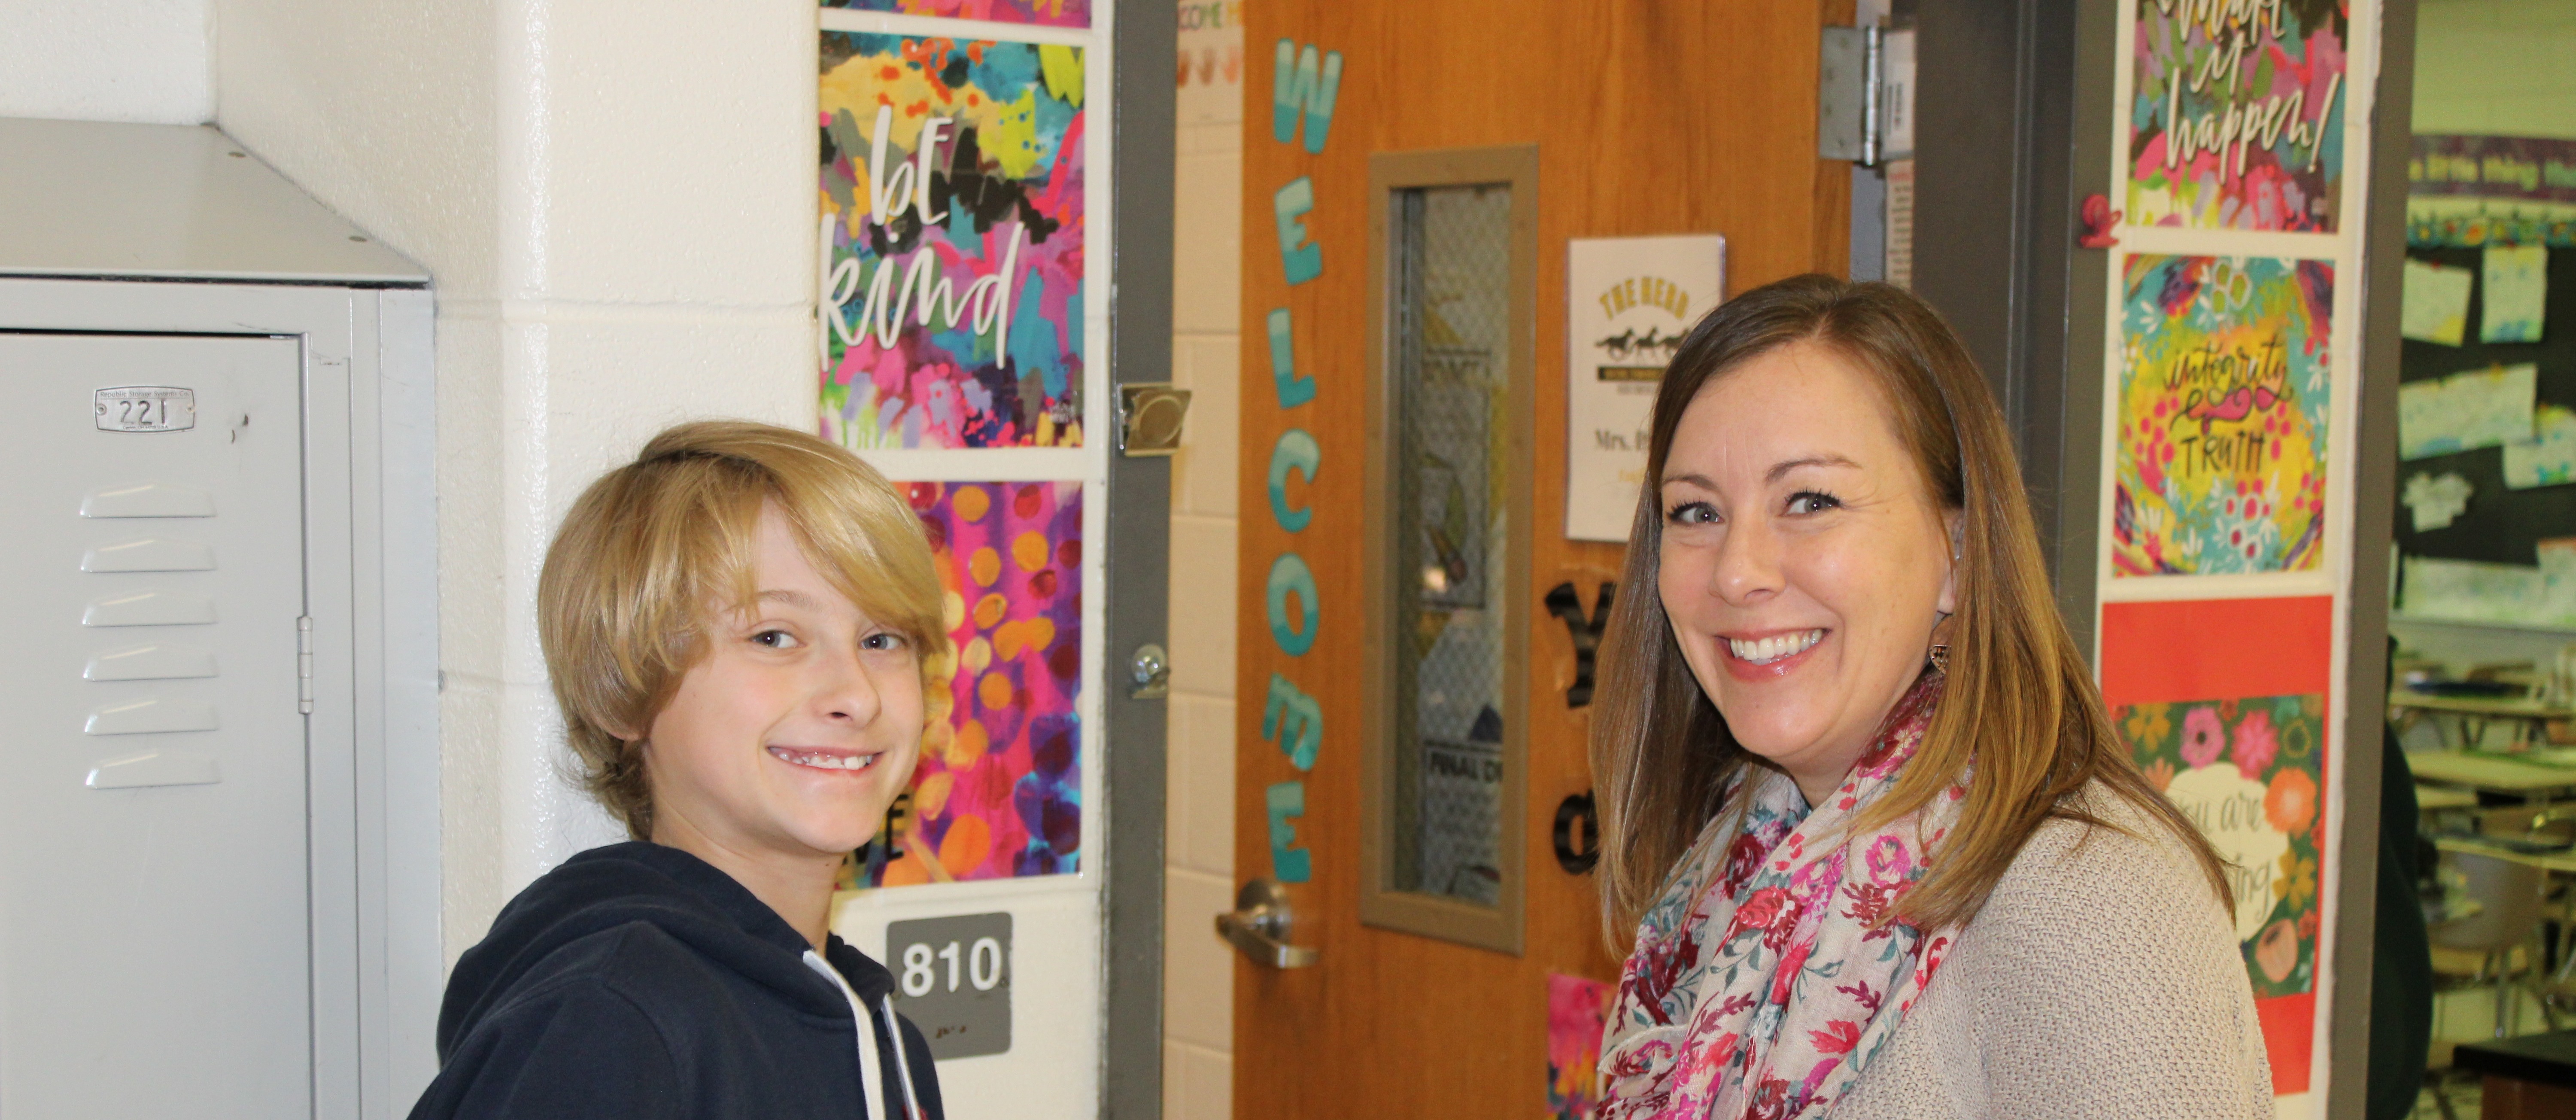 Teacher and student in hallway